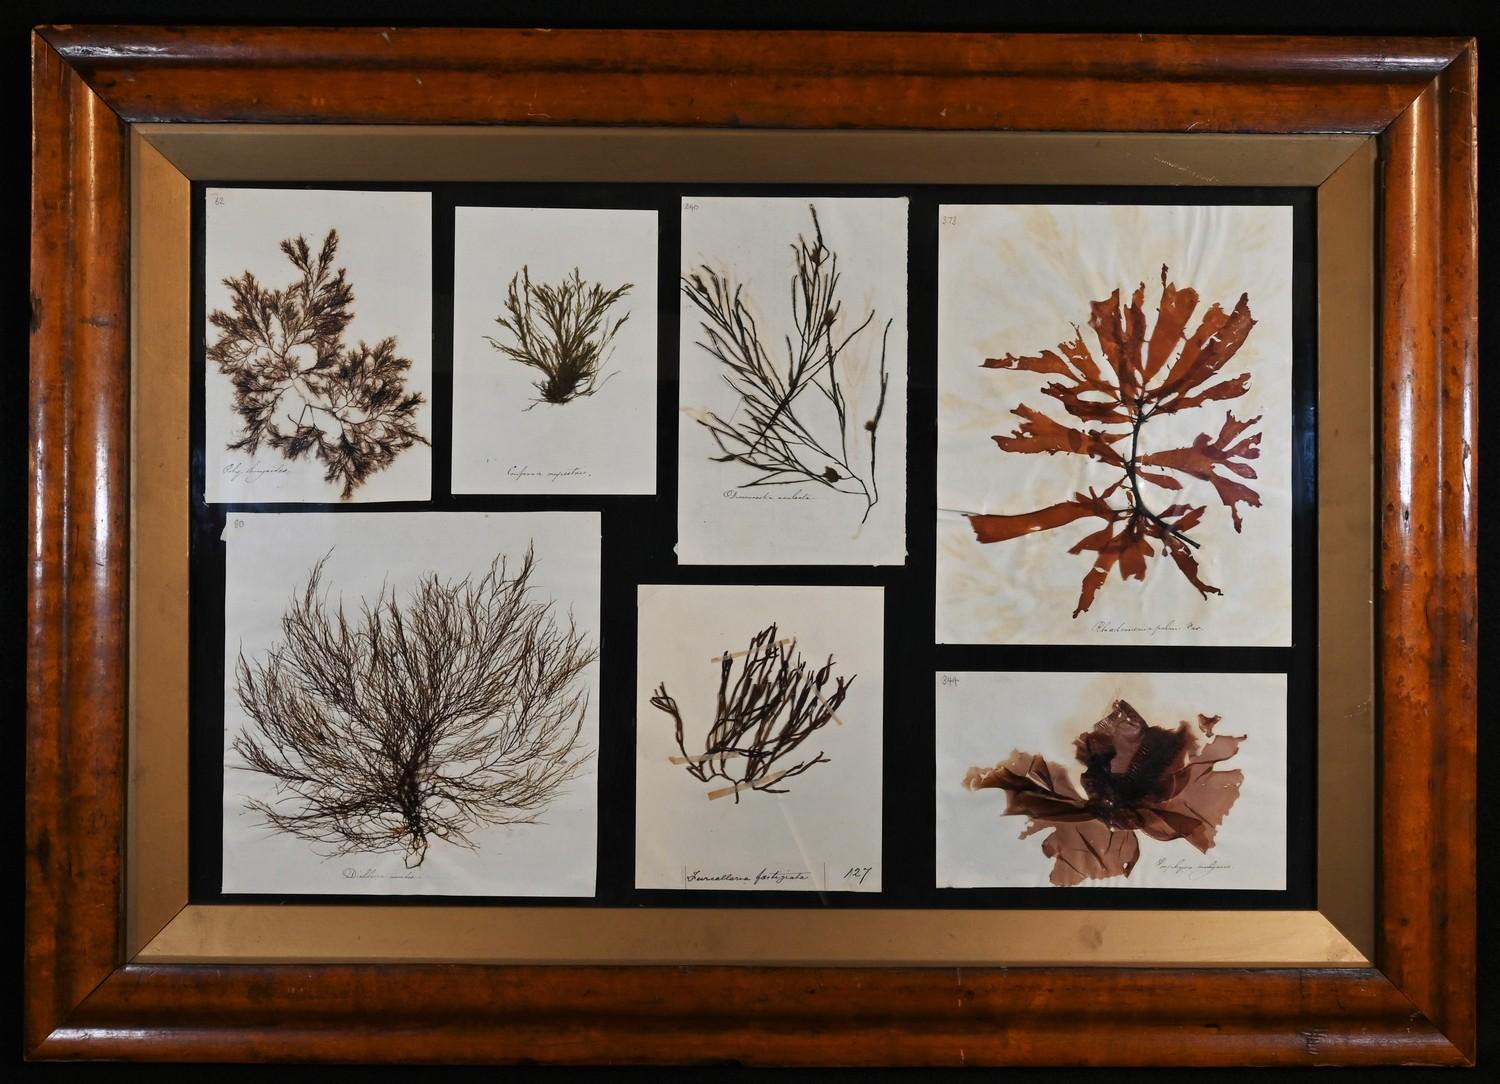 Natural History - a 'herbarium' arrangement of pressed and mounted seaweed specimens, each annotated - Image 2 of 2